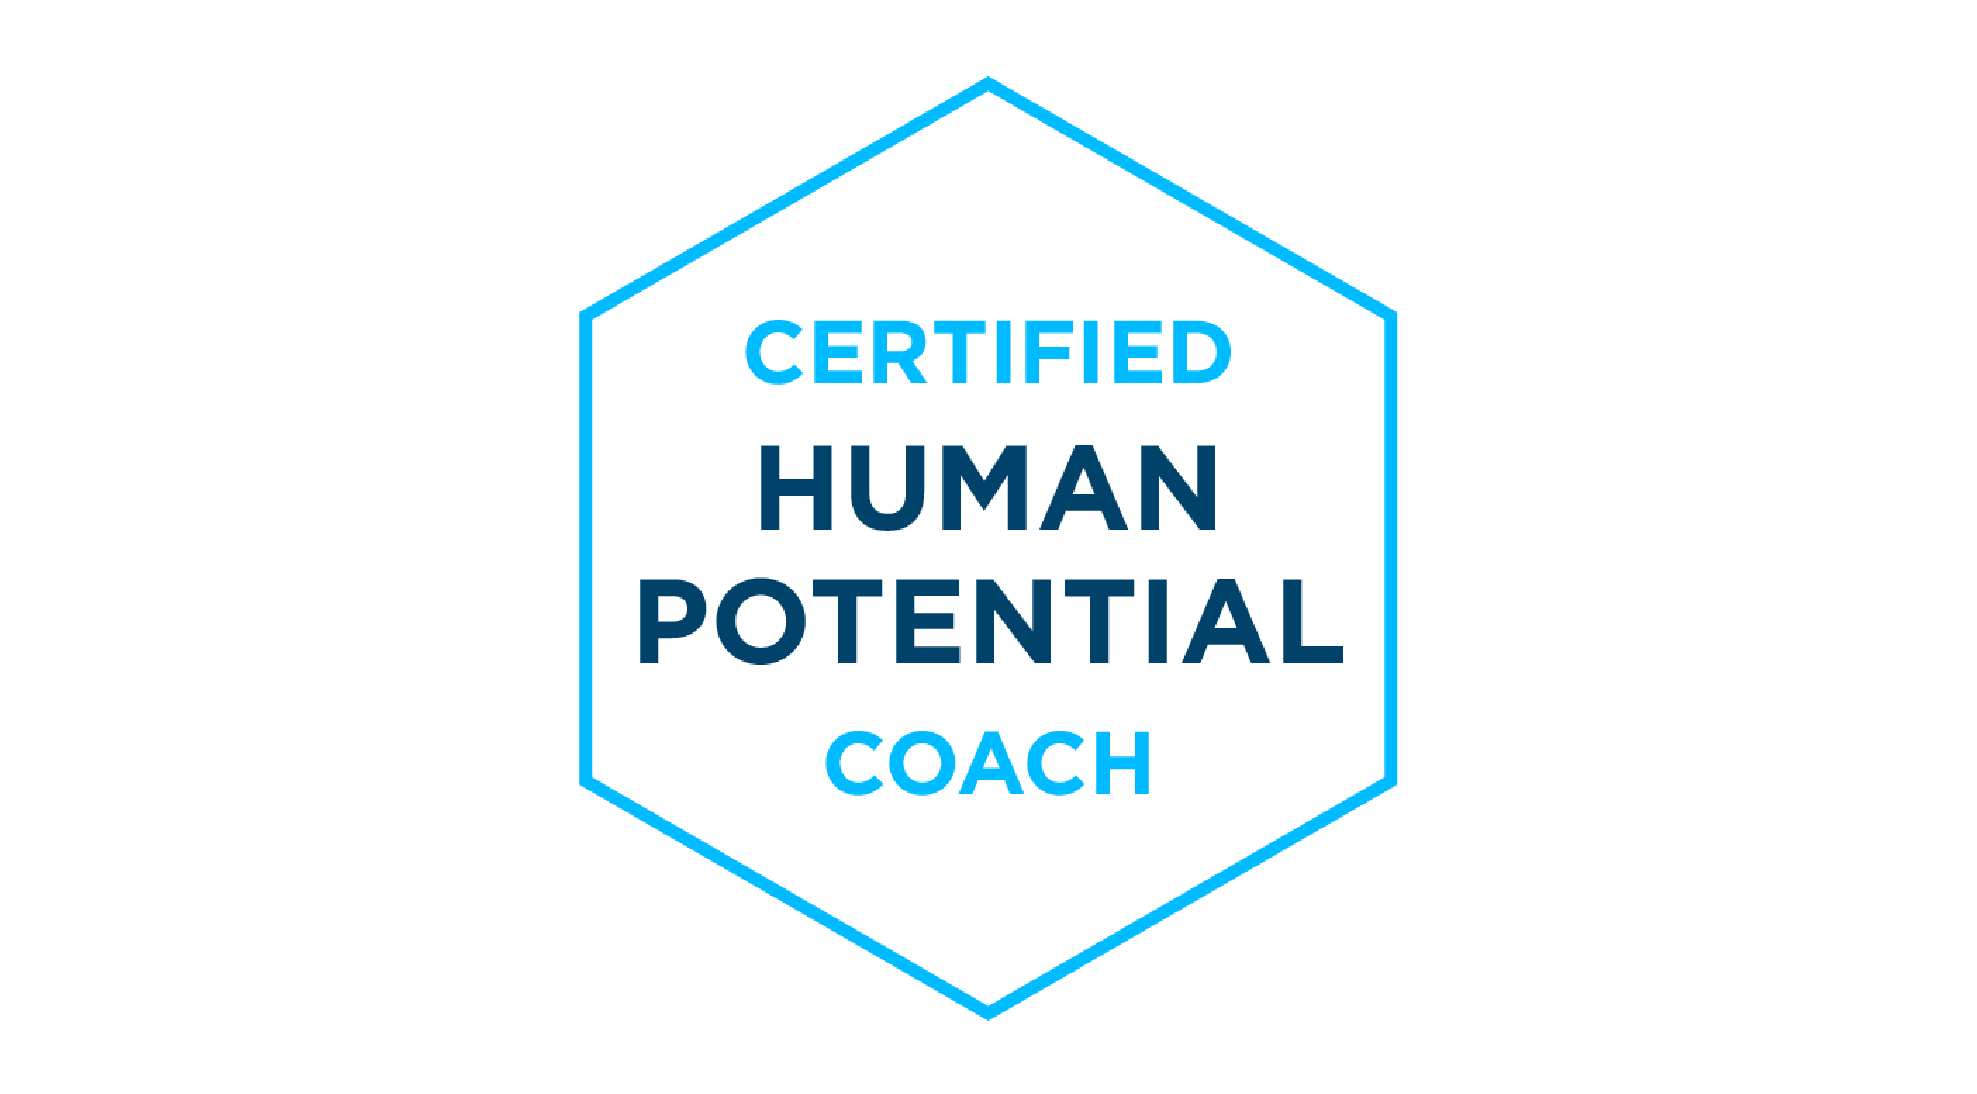 click to see my Certified Human Potential Coach Accreditation.